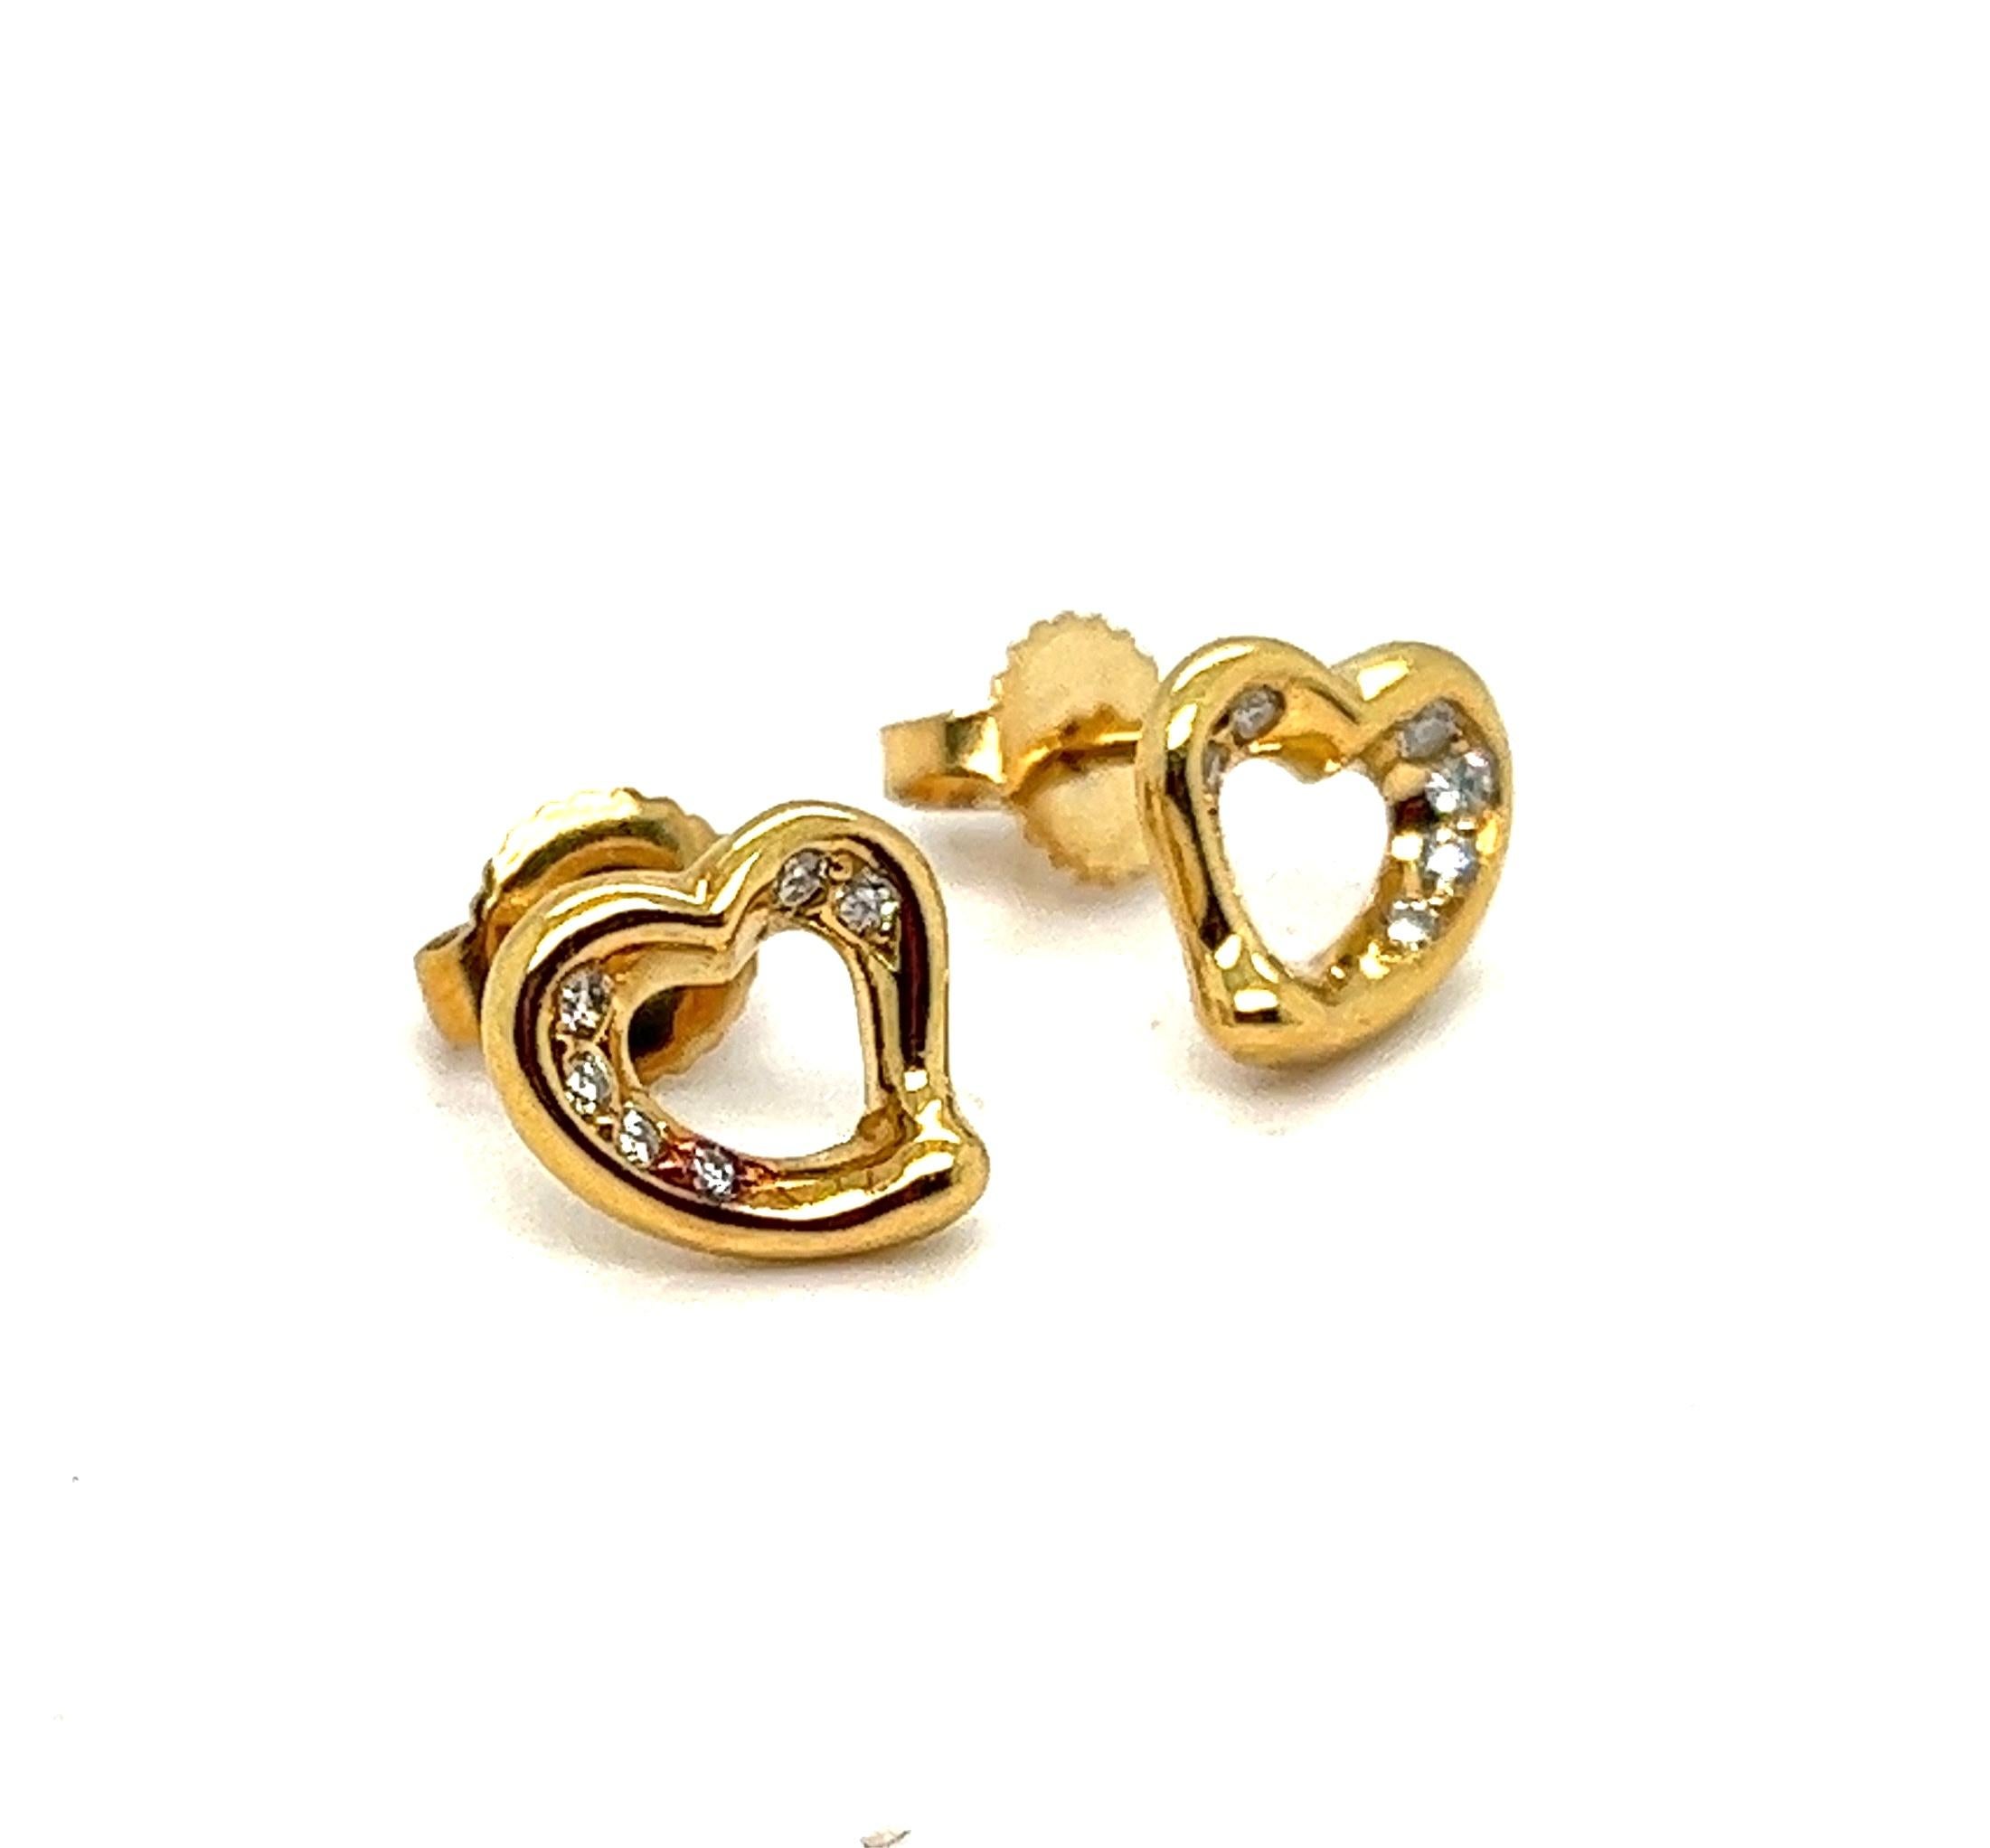 Offered here is an authentic Tiffany & Co. open heart stud earrings adorned with top quality diamonds.
Made in solid 18 karat yellow gold, with pushbacks for pierced ears.
The simple, evocative shape of Elsa Peretti open heart designs celebrate the